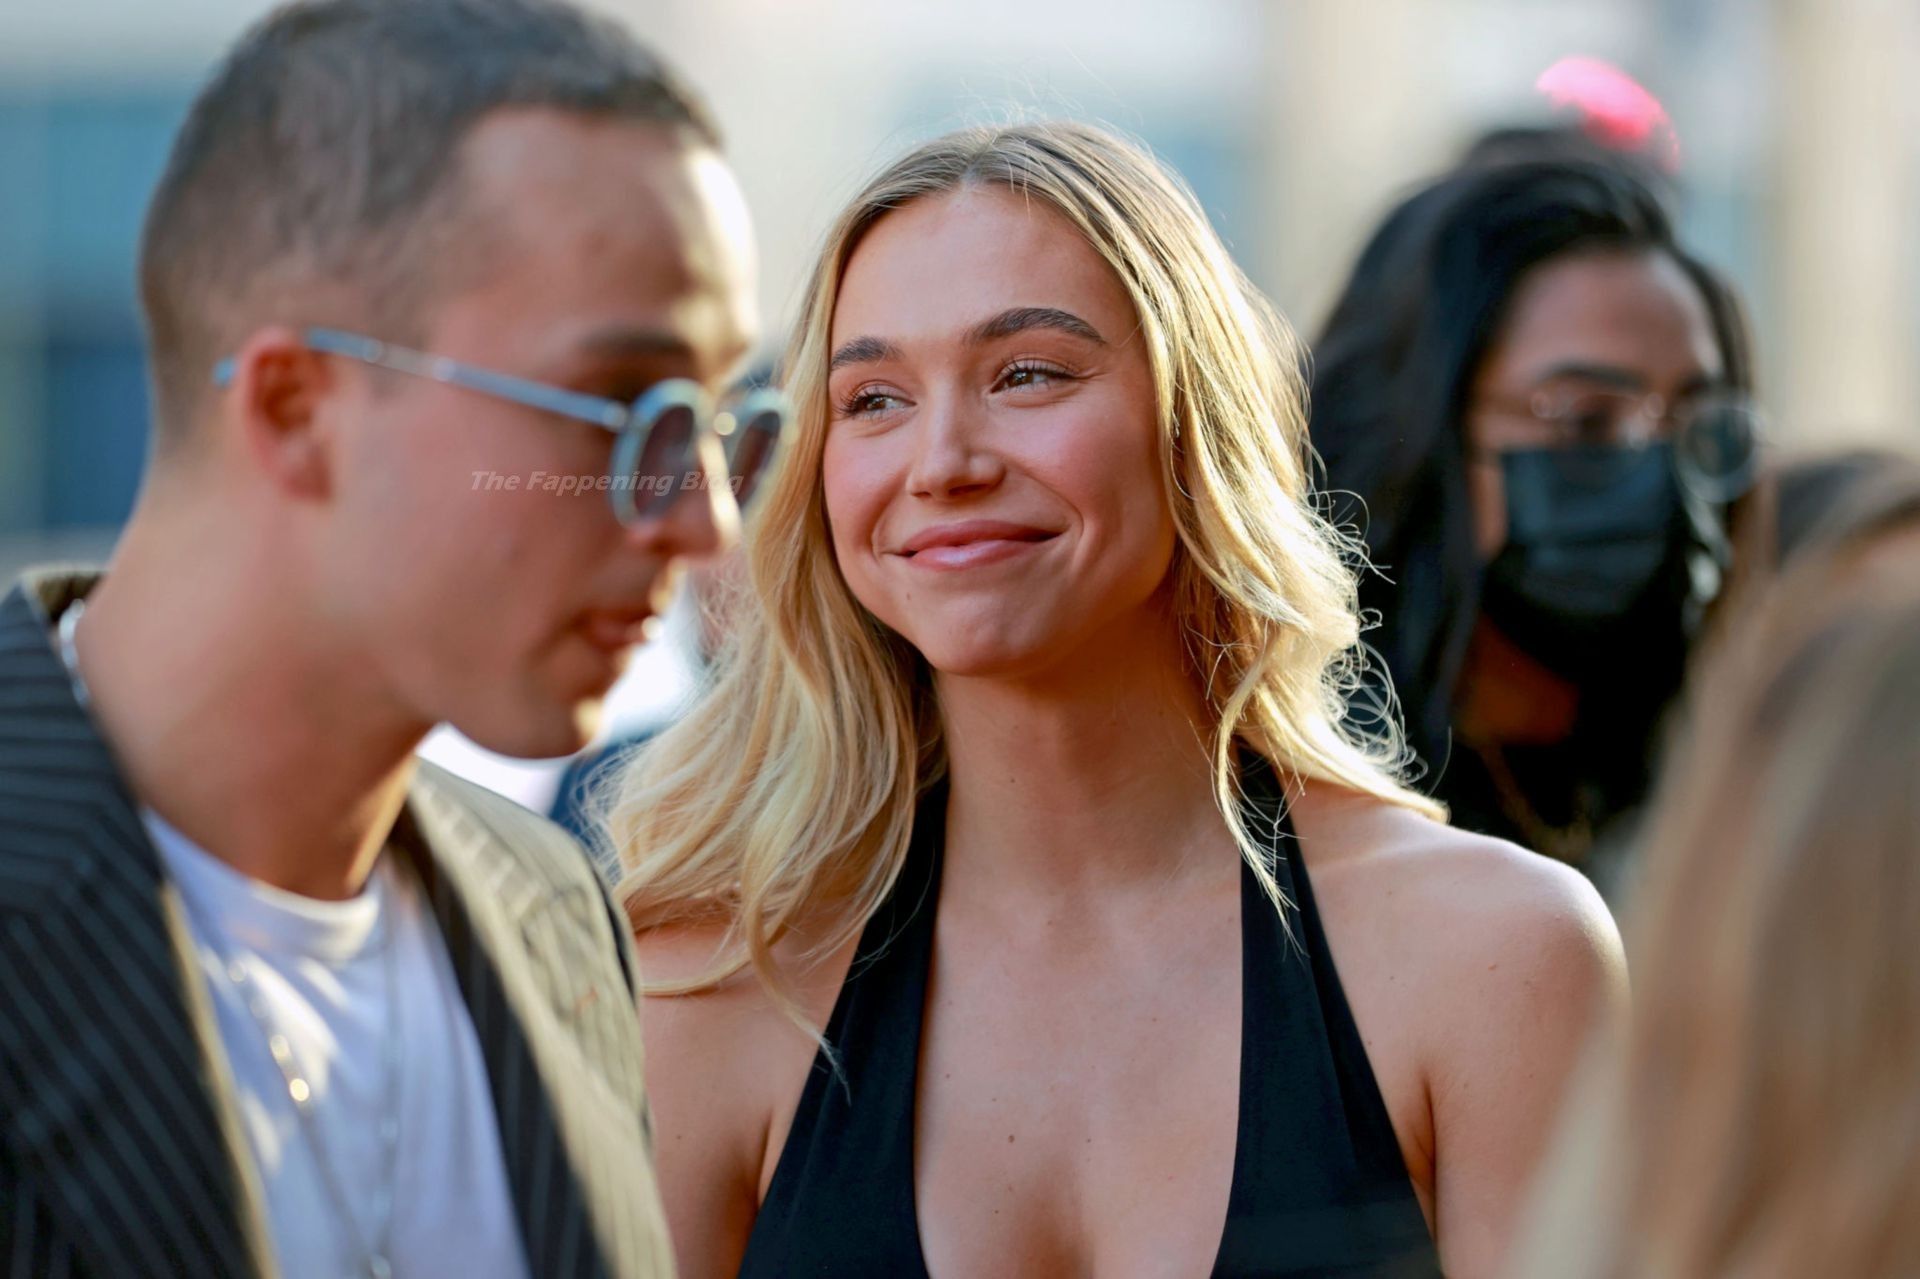 Alexis Ren Poses on the Red Carpet at the Reminiscence Premiere in LA (19 Photos)